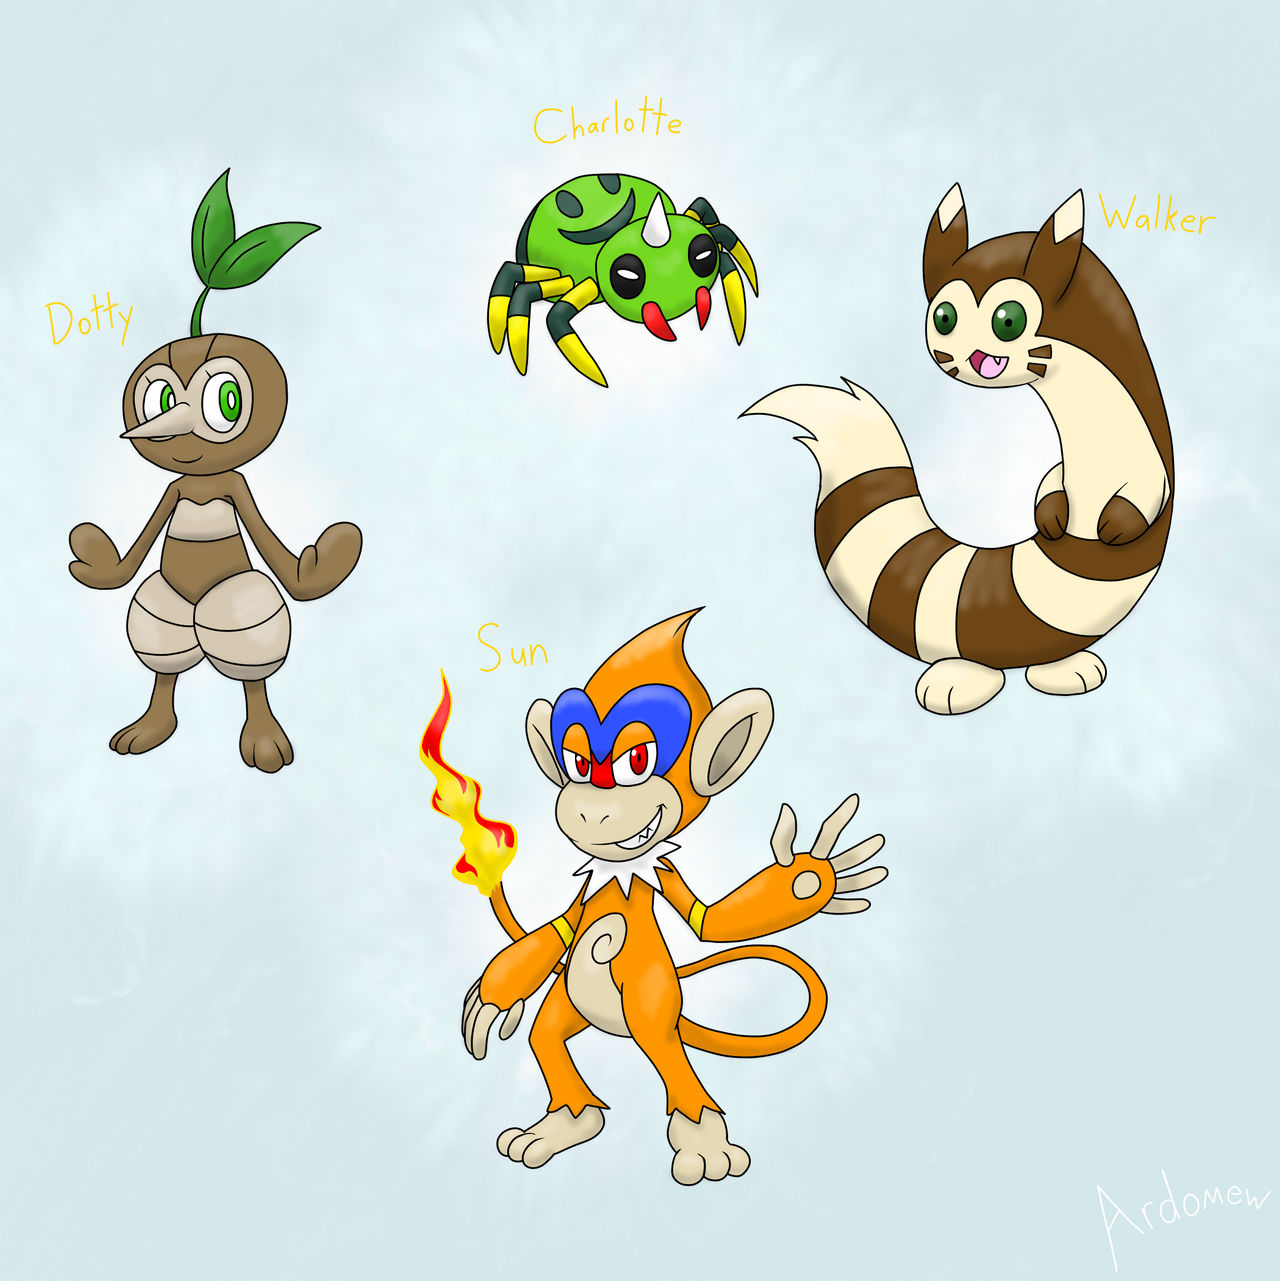 I just started my soul silver randomizer. The starters are